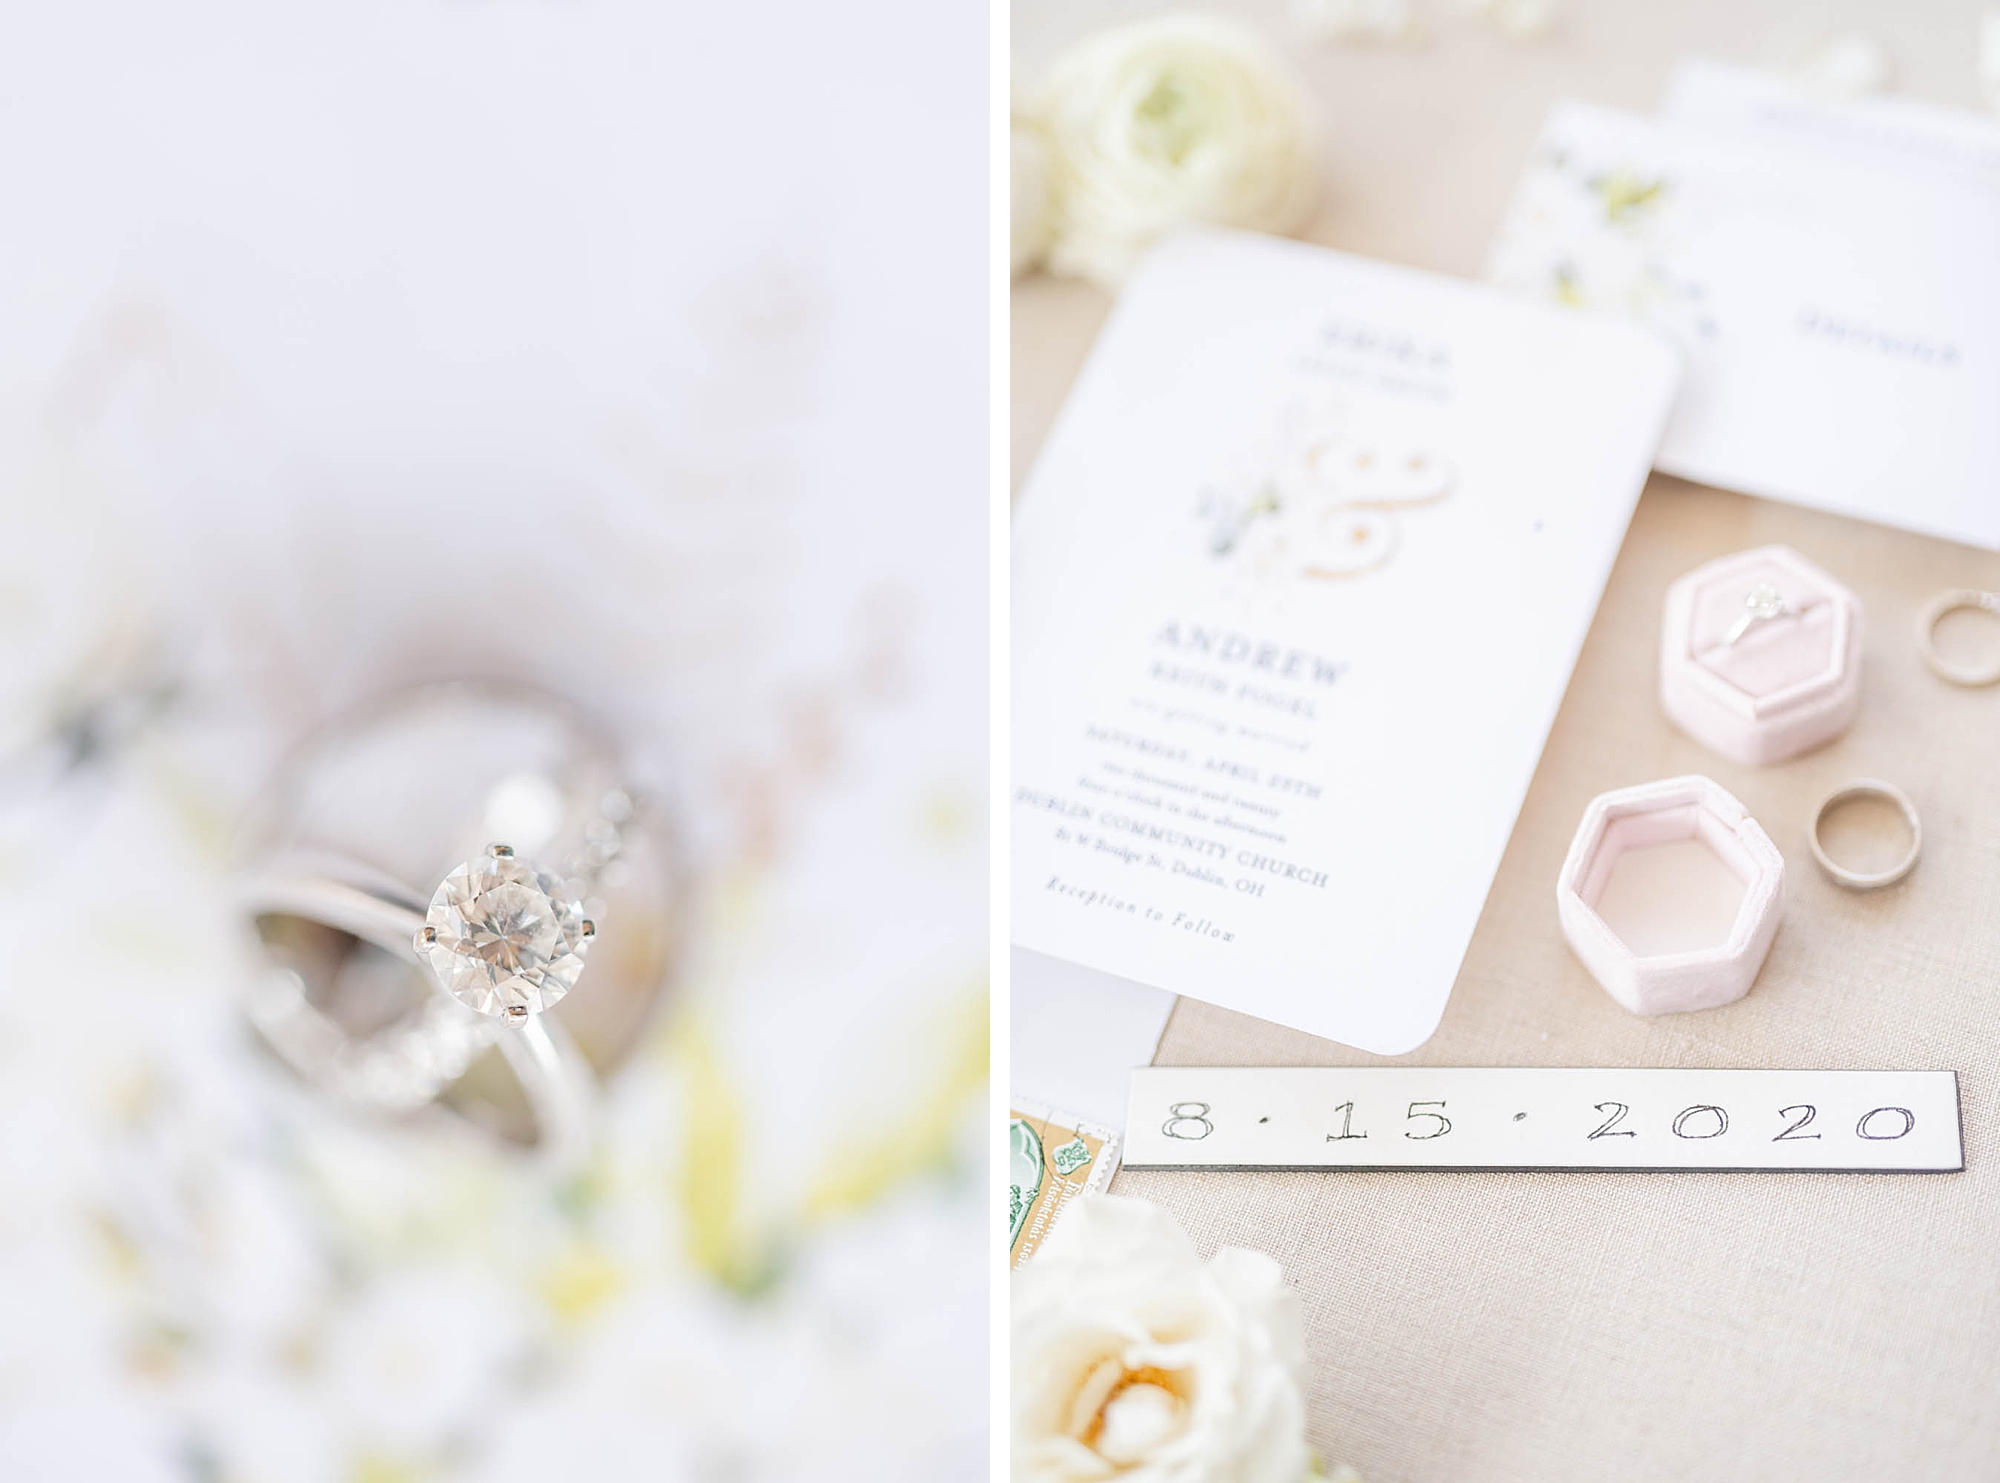 Ohio wedding day details with invitations